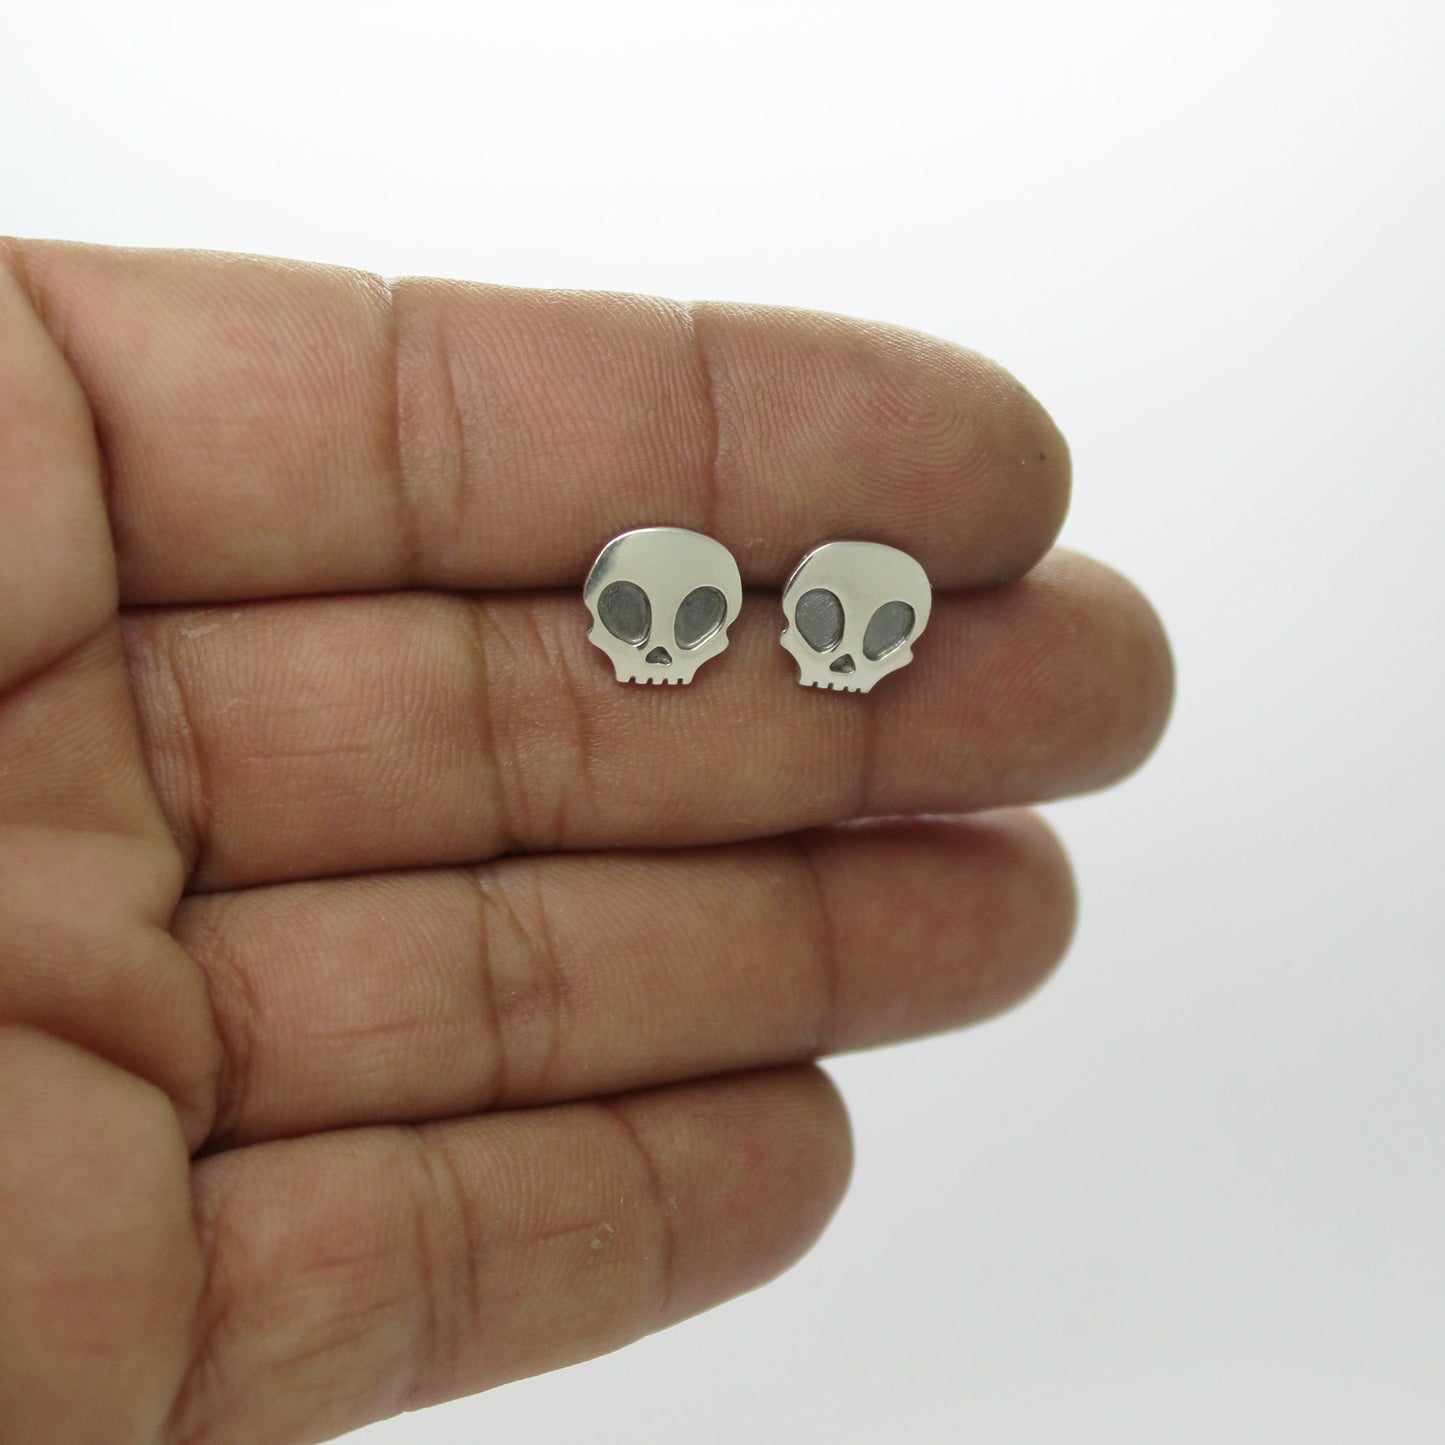 925 silver skull earrings with patina